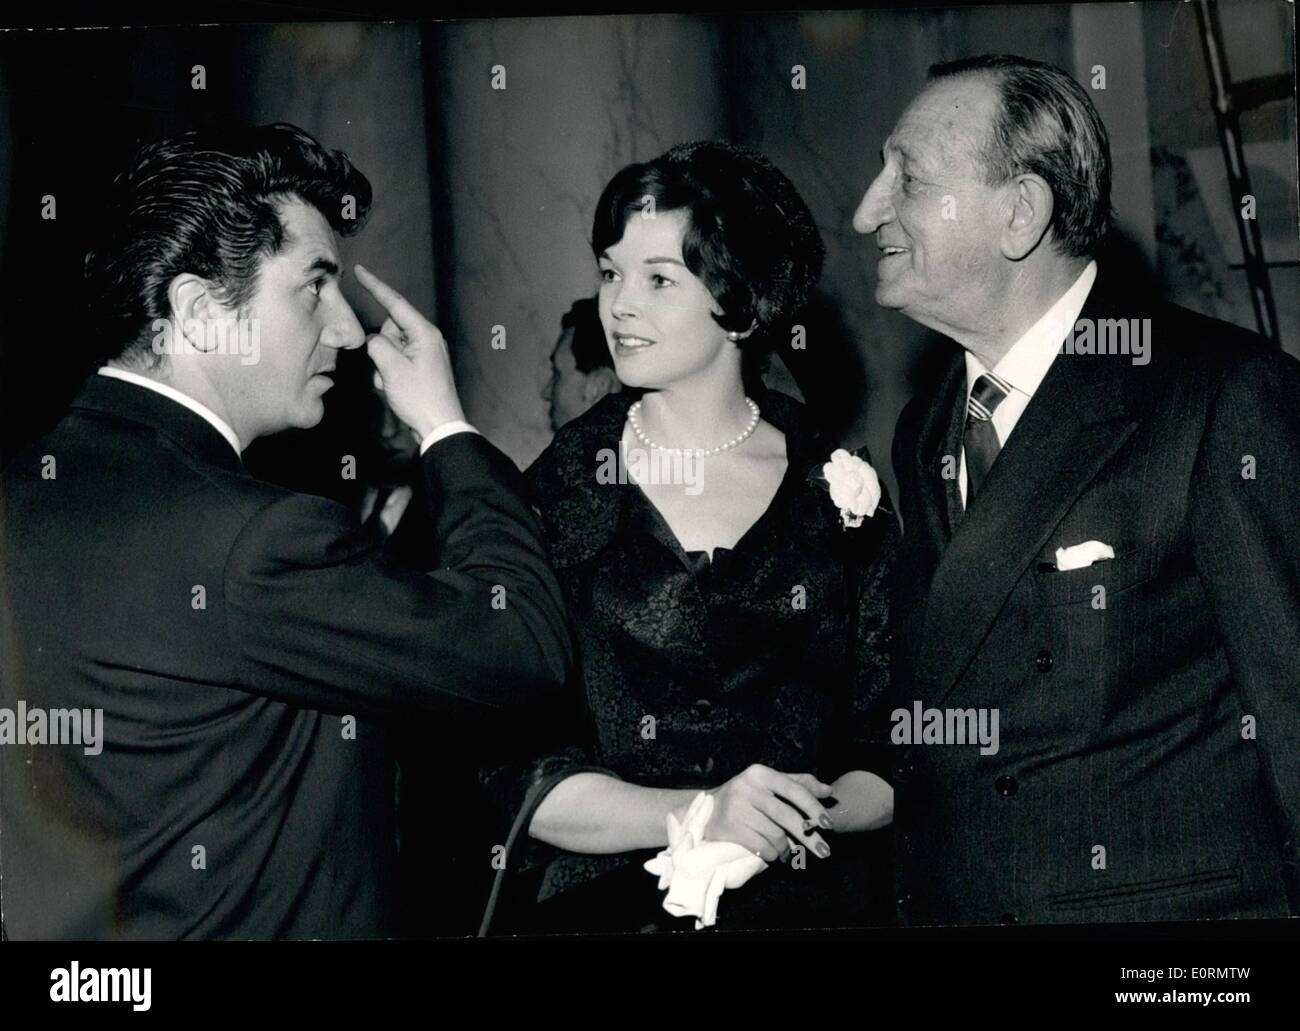 Mar. 03, 1960 - ''Don't I Look Like Nero? This is what Daniel Gelin, left, the famous French screen and stage actor, was heard to say to the Italian film director Carmine Gallone pointing to his ''Nero'' lock. The occasion was a cocktail party held by Gallone to celebrate the premier of his film ''Carthage en Flamme'' starring Daniel Gelin and Dawn Addams (center). Gallone is said to be planning a new film featuring Nero, the Roman Emperor. Stock Photo